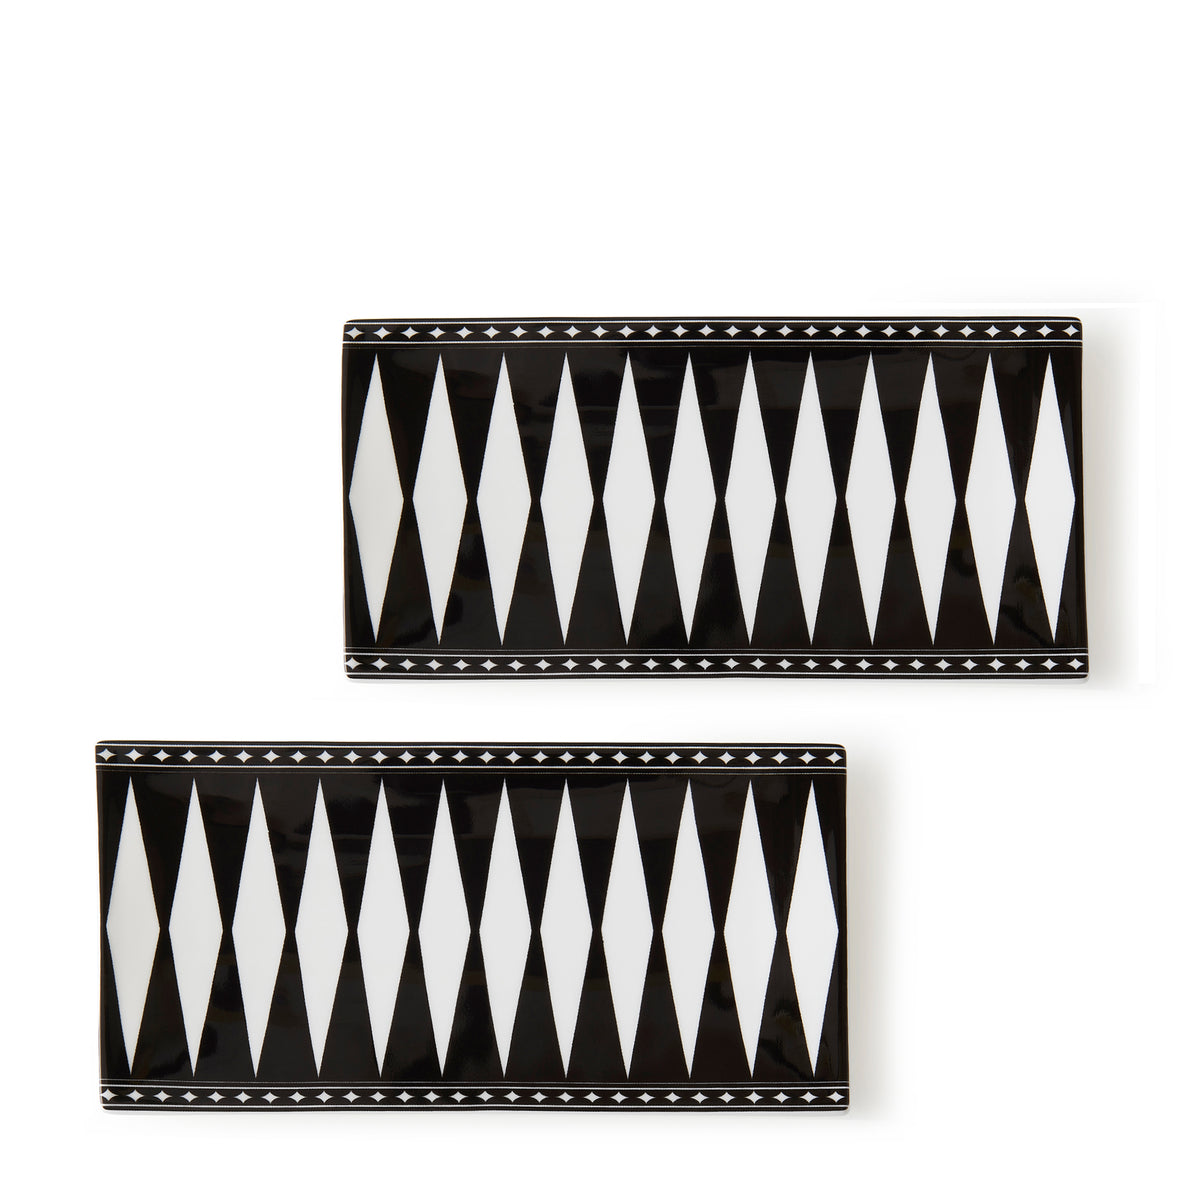 Two rectangular bone china plates feature black and white geometric diamond patterns with star accents along the borders, evoking an Art Deco elegance reminiscent of Caskata&#39;s Marrakech Medium Sushi Trays, Set of 2.